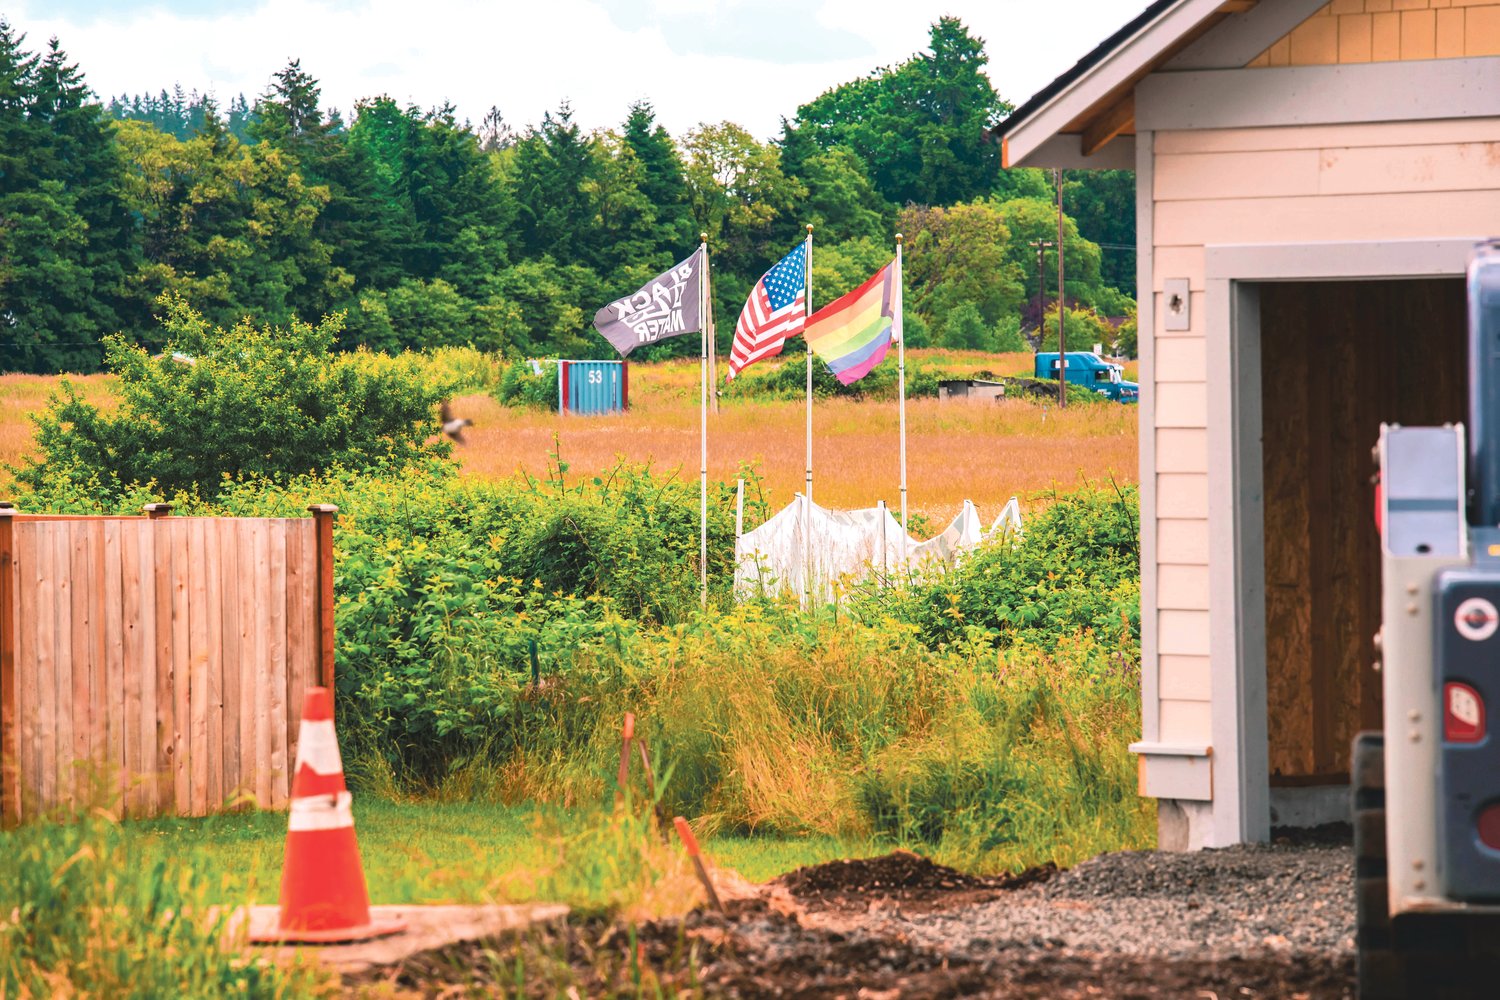 Flags on the Lewis County Lollipop Guild’s property wave between homes on Monday. In a lawsuit, Lollipop Guild founder Kyle Wheeler alleges that local governments have favored Scott Marvin’s Marvin Construction, LLC, which has “repeatedly encroached” and “continually trespassed” on his single-acre property.